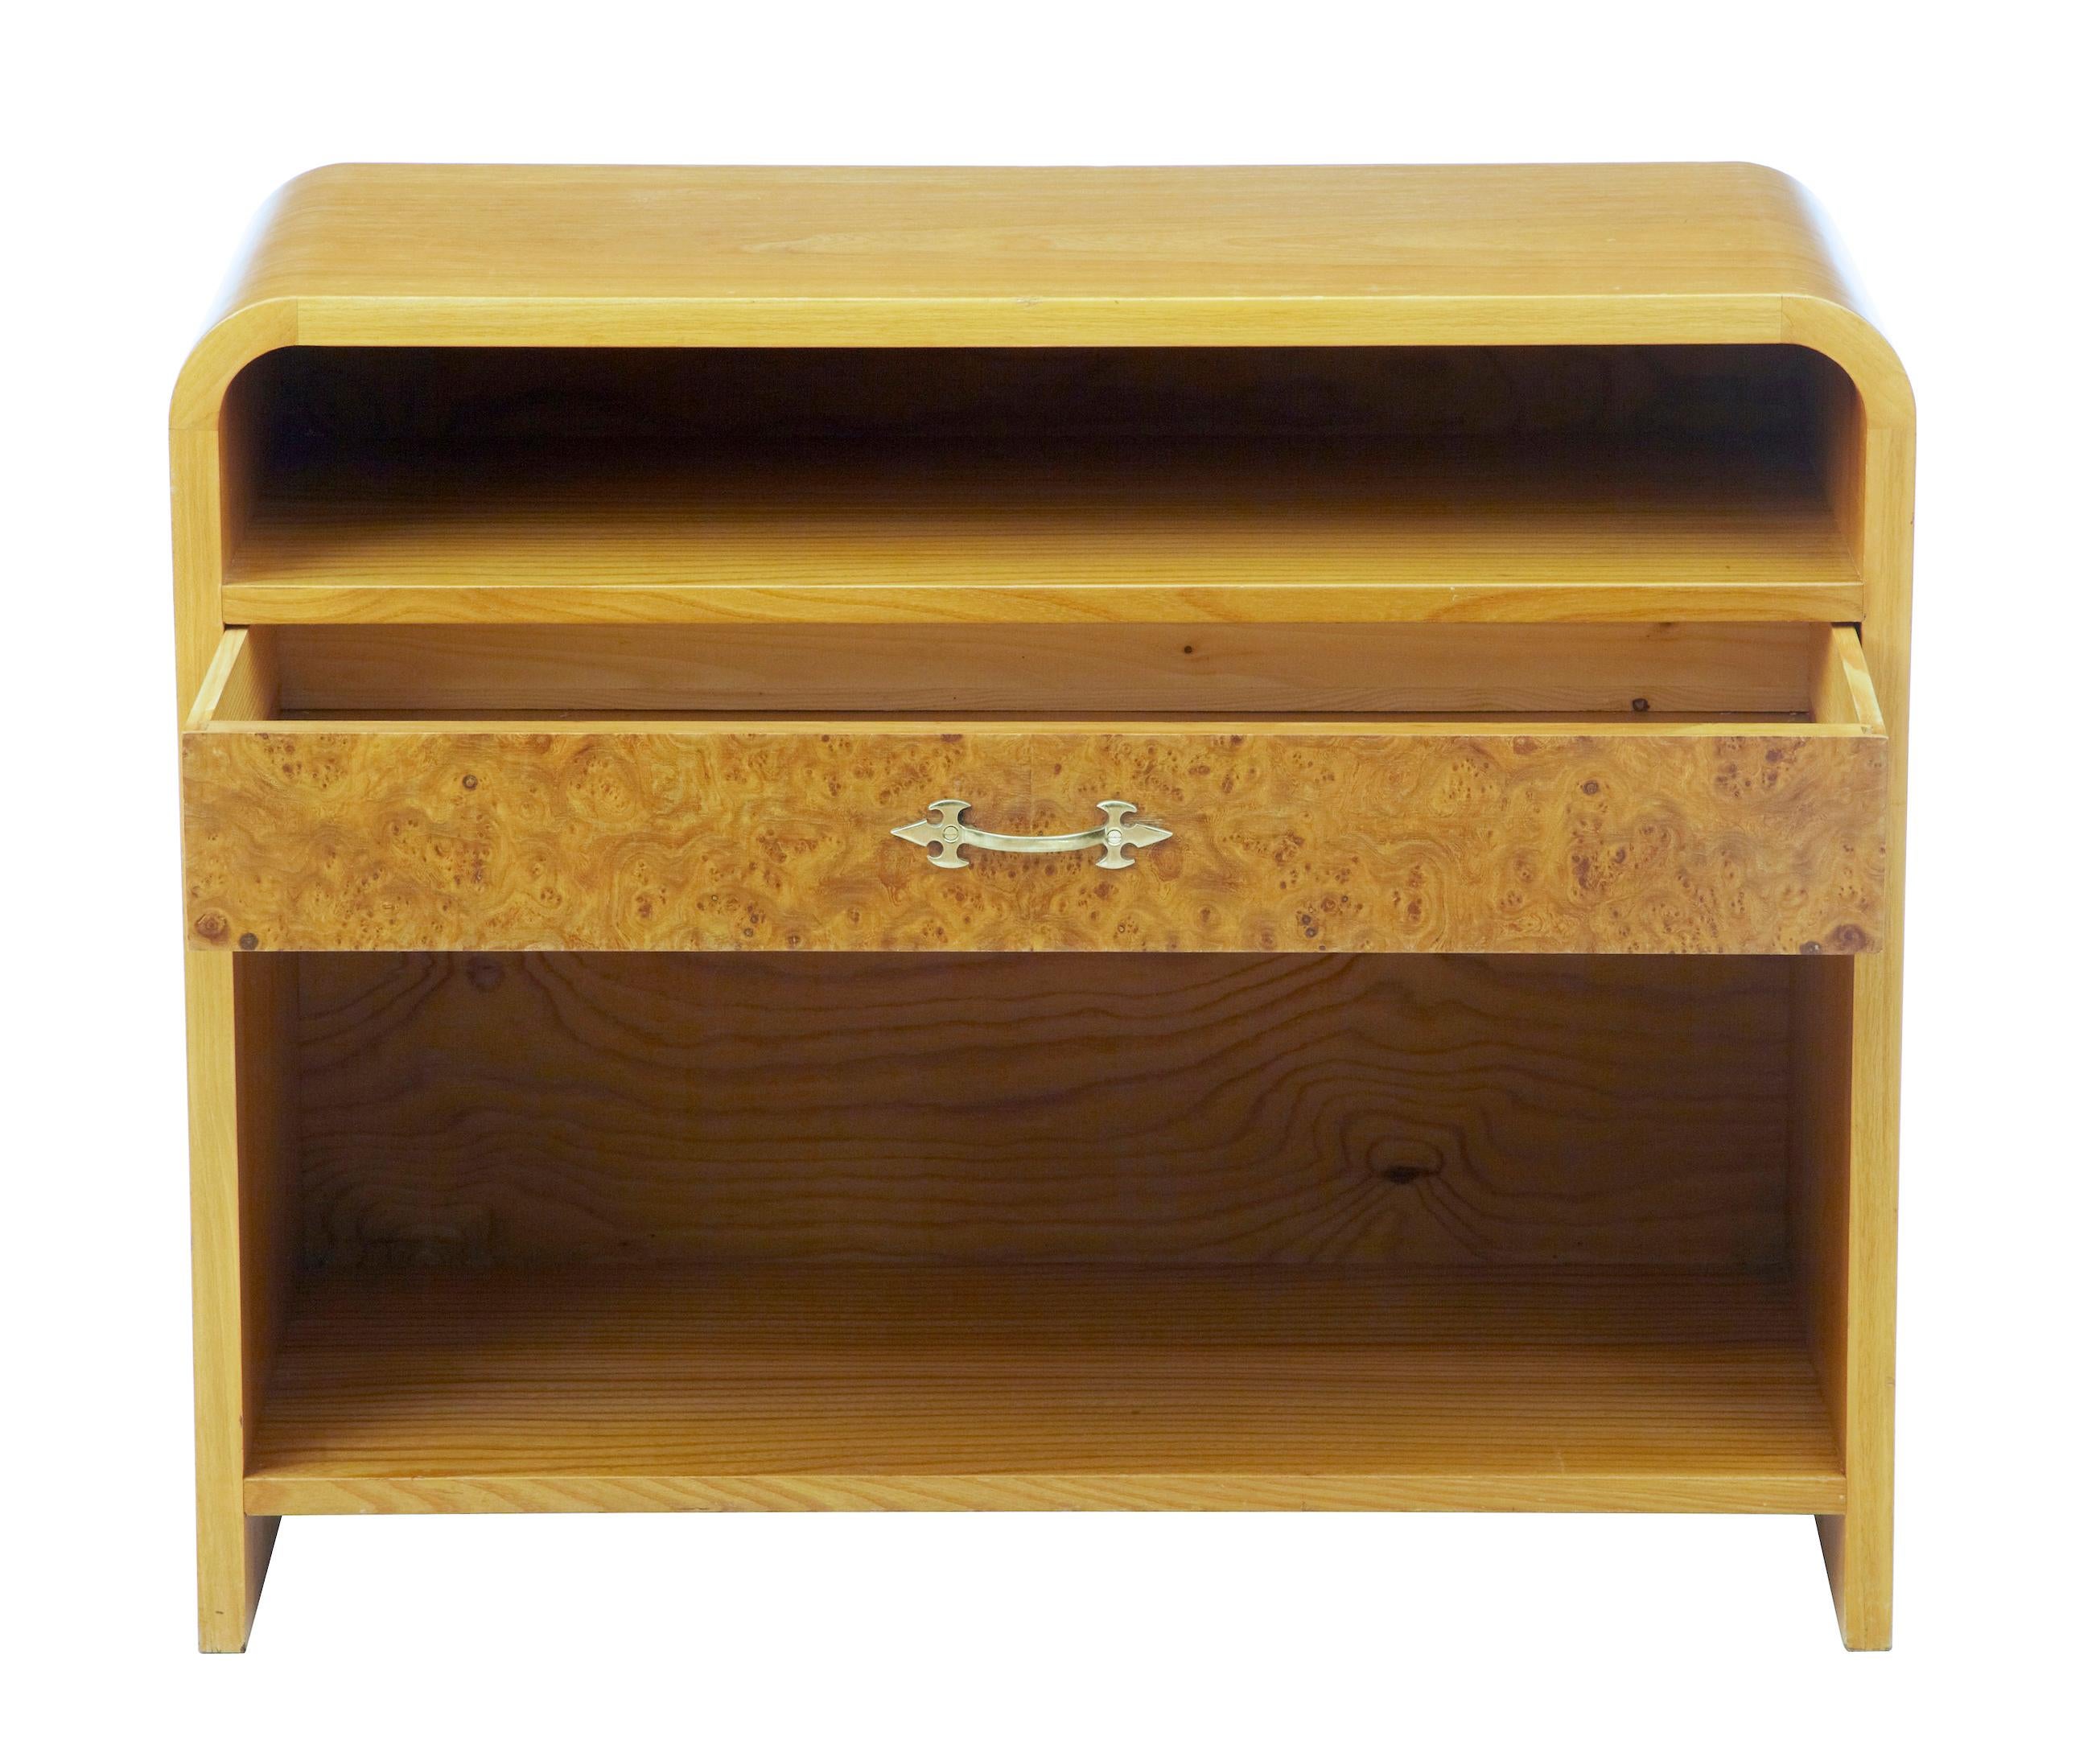 Mid-20th century Scandinavian shaped birch bedside table, circa 1960.

Good piece of Scandinavian Modern furniture, circa 1960. Curved shape sides, with open space below which a burr birch drawer and larger open aperture below.

Evidence of use